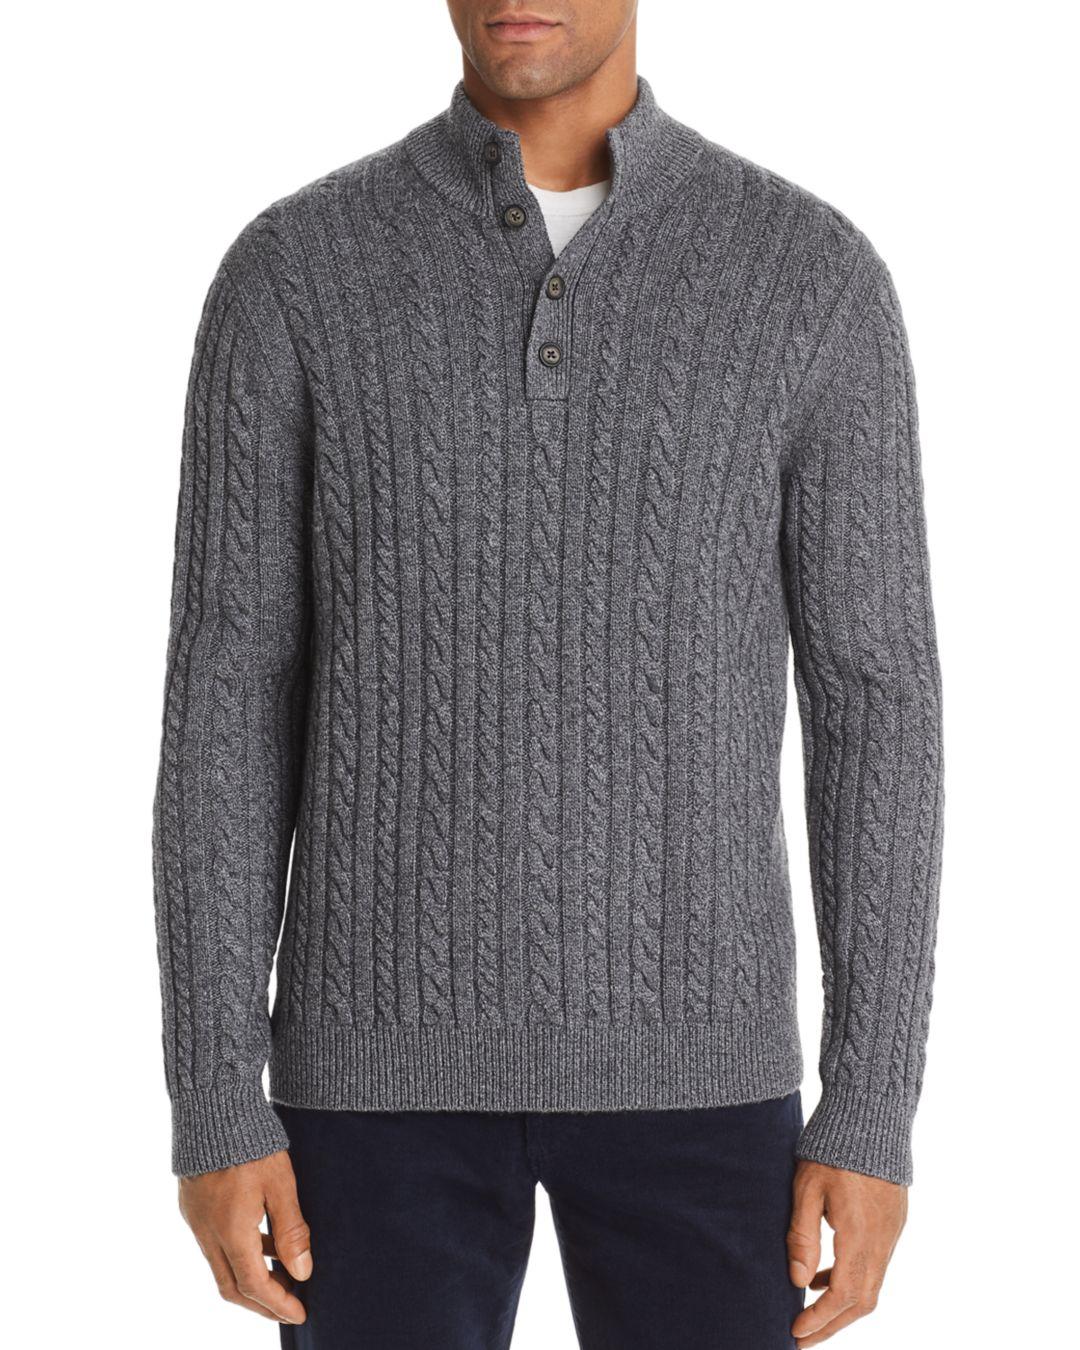 Bloomingdale's Wool Half - Button Cable Sweater in Gray for Men - Lyst